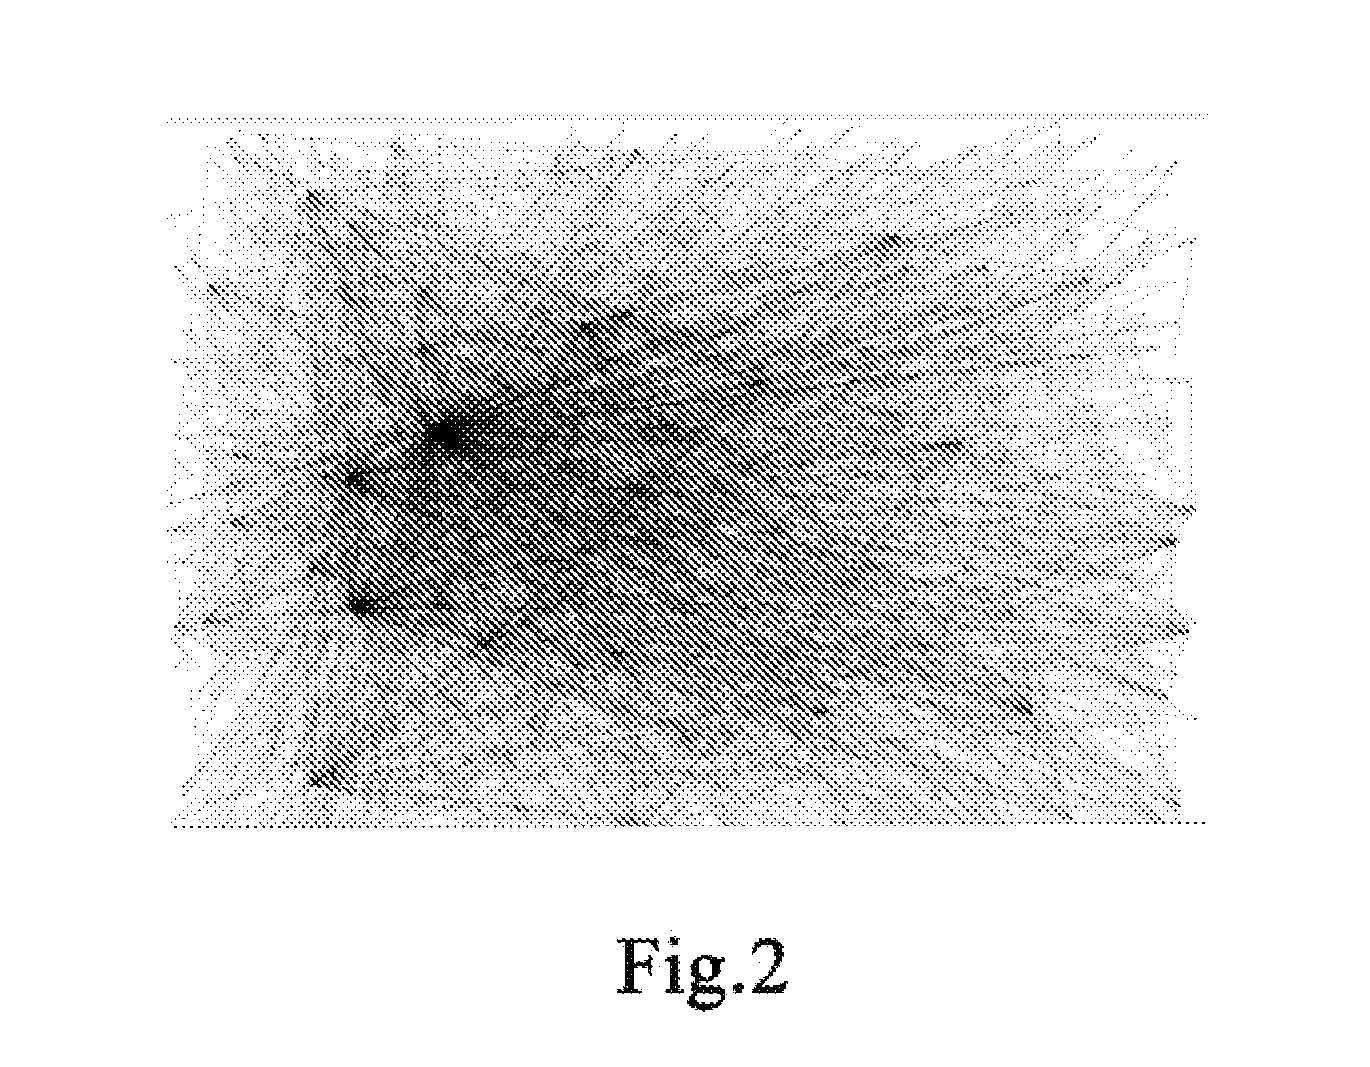 Deadlock detection method and system for parallel programs